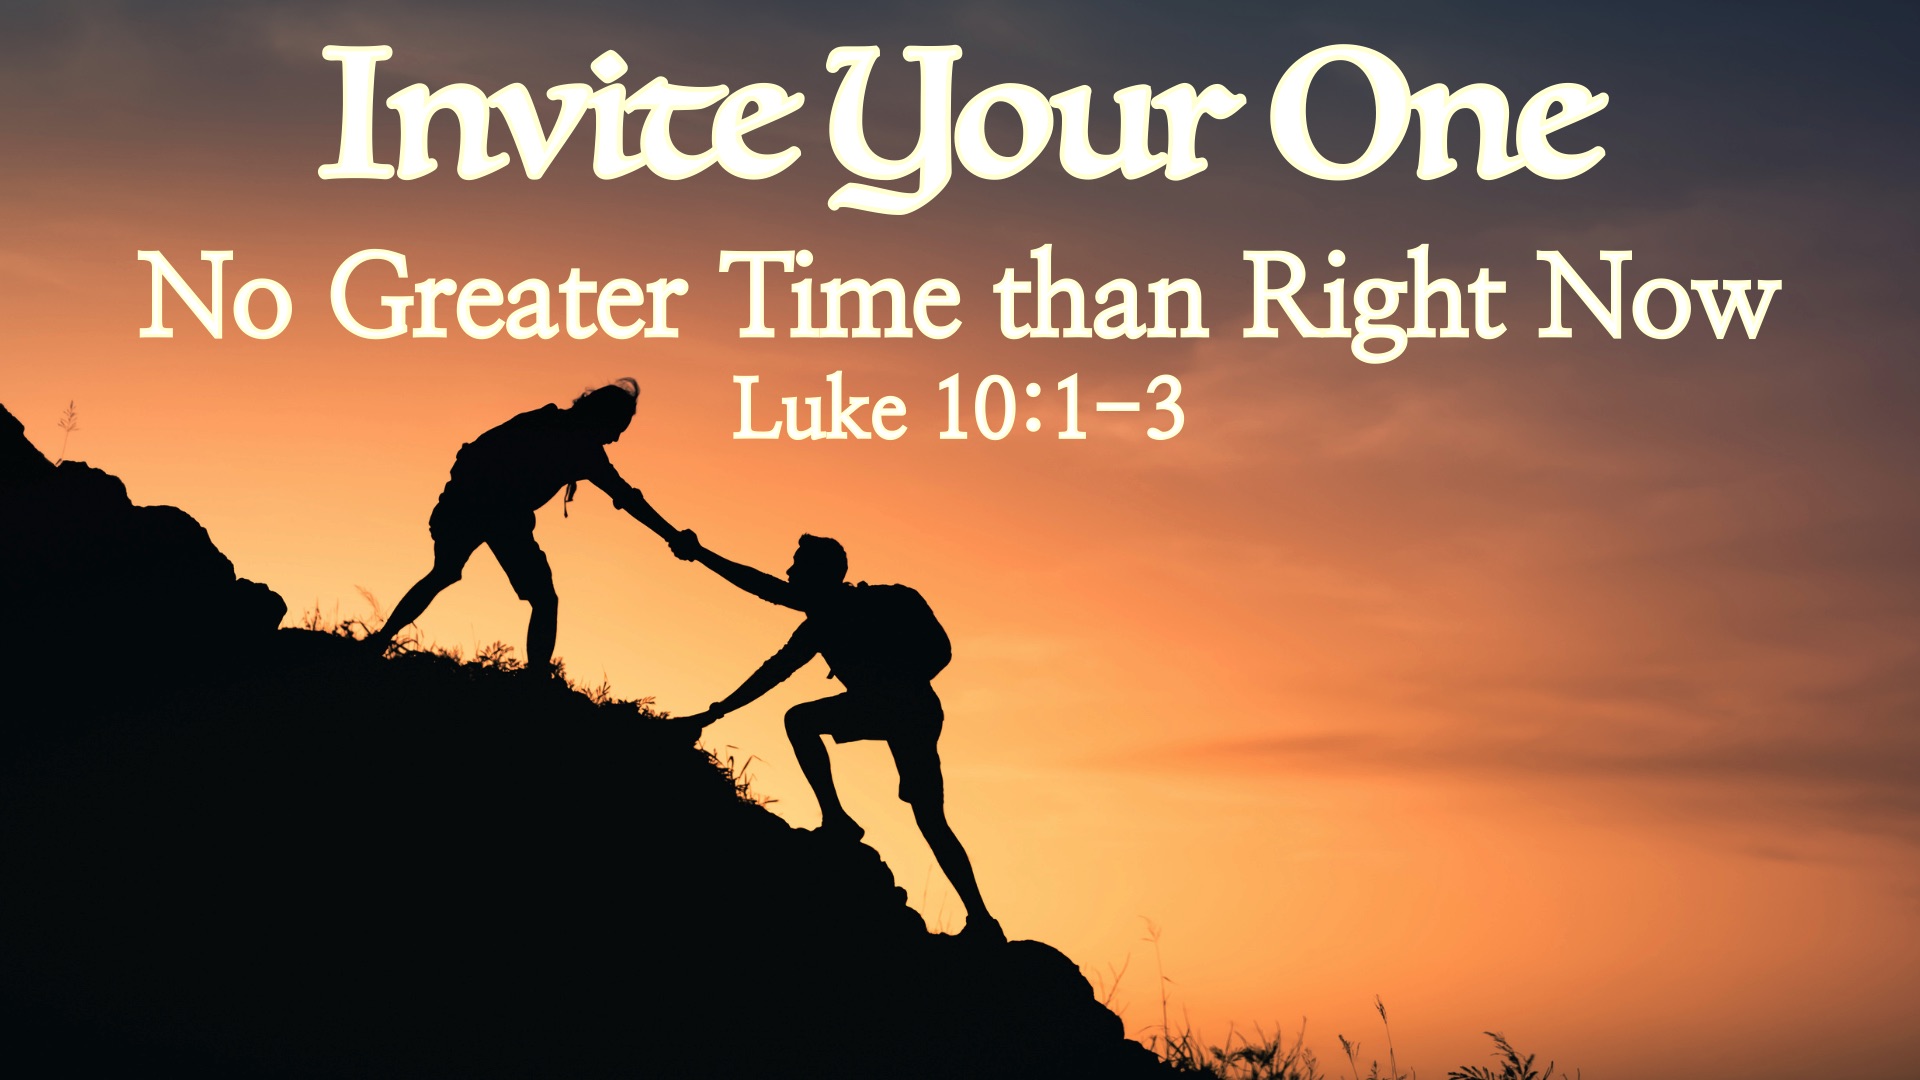 “Invite Your One: No Greater Time Than Right Now”